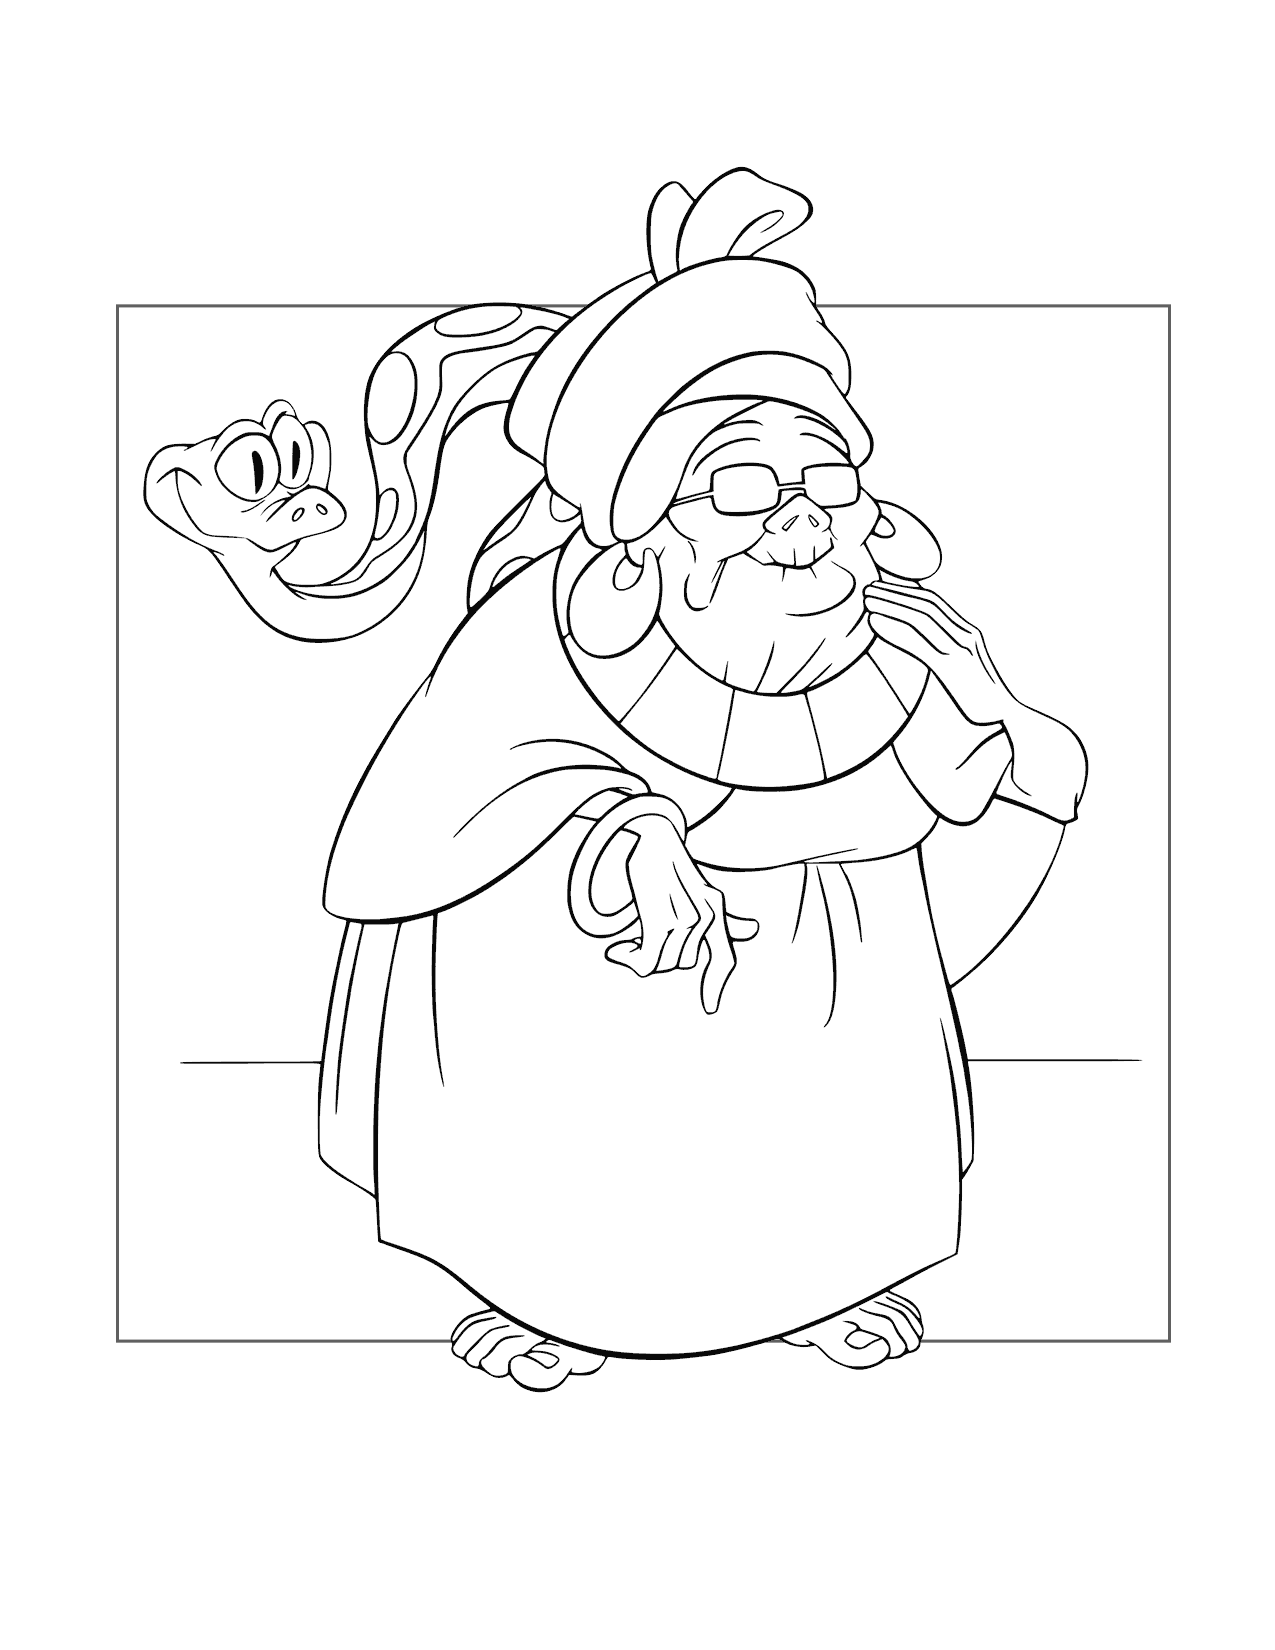 Mama Odie Princess And The Frog Coloring Page